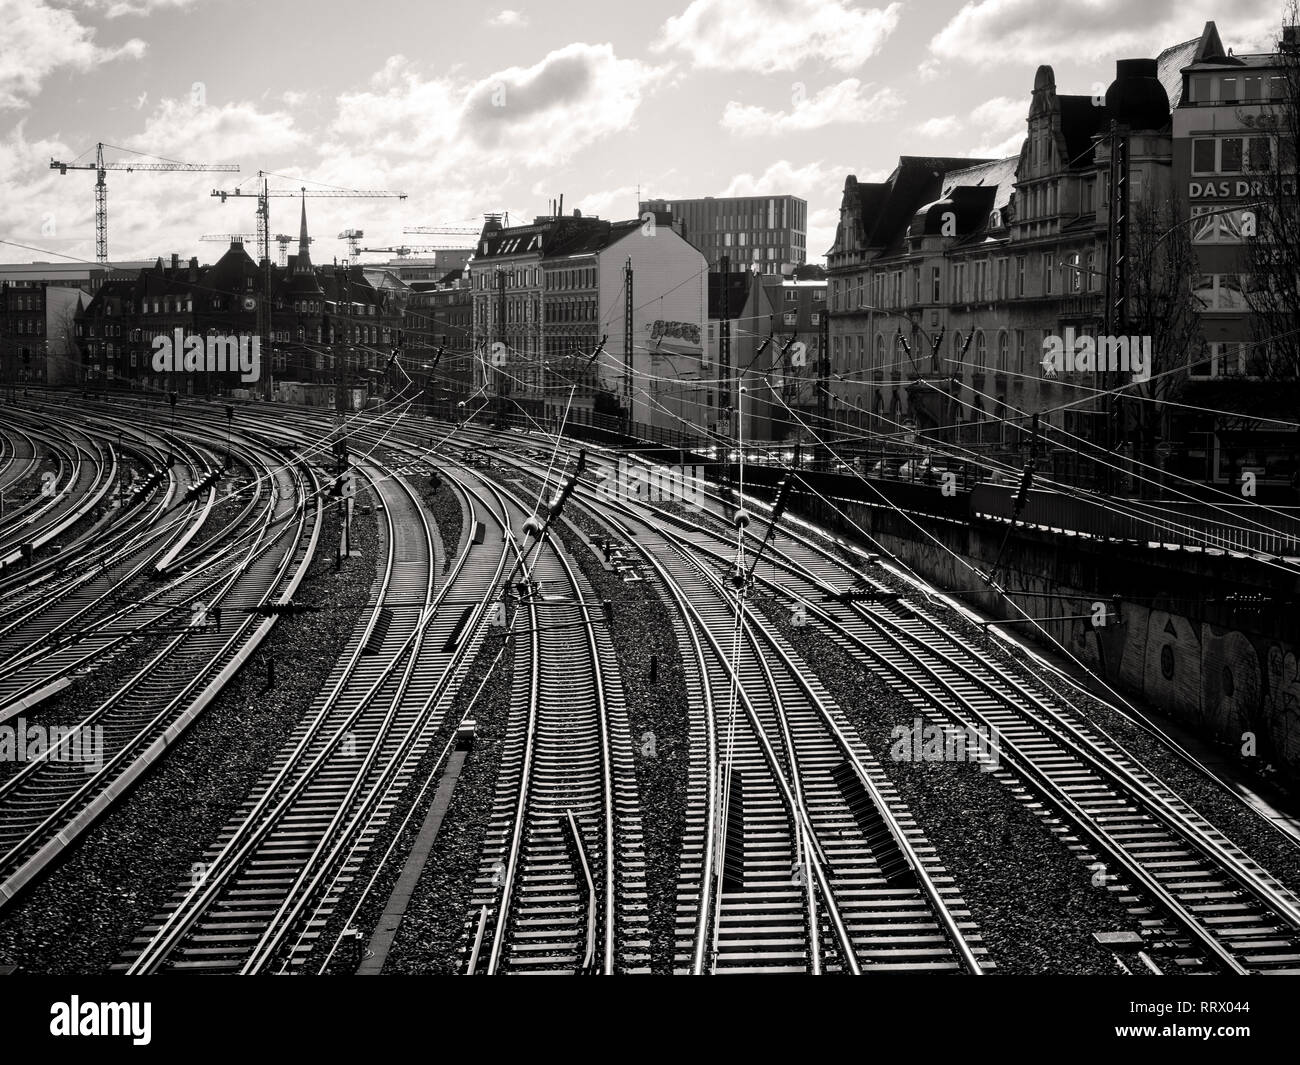 HAMBURG, GERMANY - MAR 20, 2018: Hamburg morning scene with rows of rails in perspective and traditional Hamburg architecture - black and white sepica colored Stock Photo